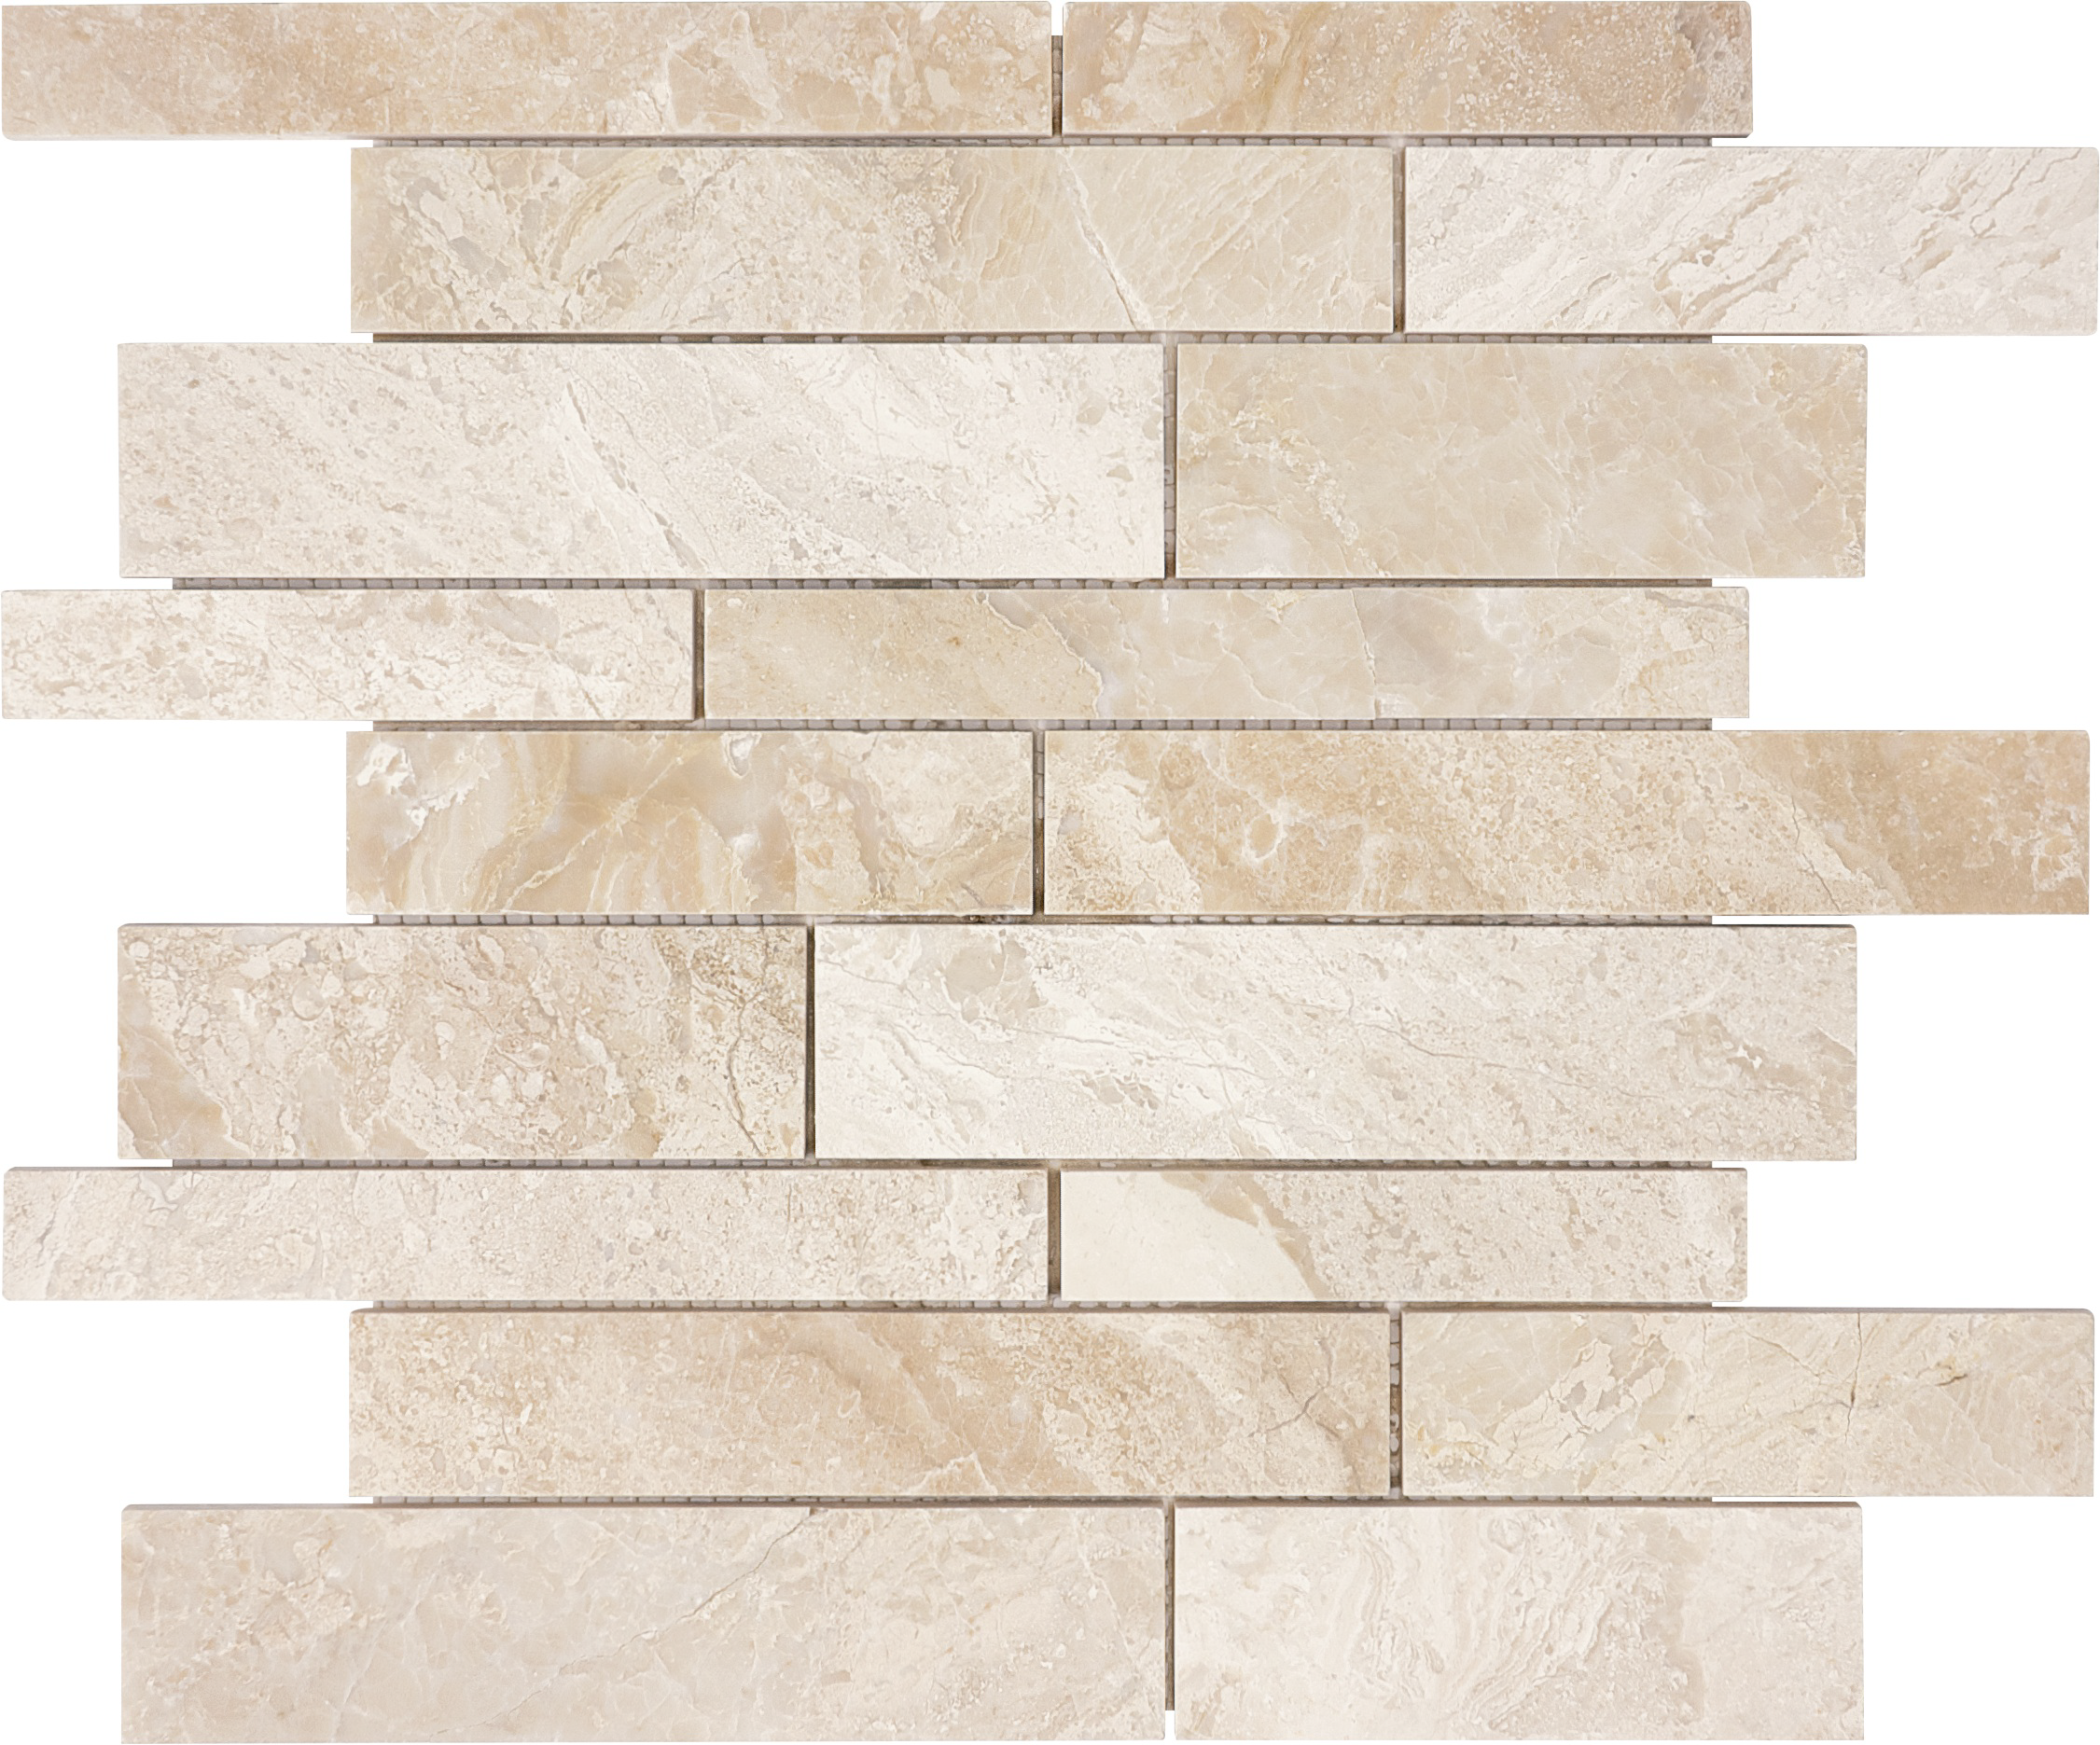 marble random strip pattern natural stone mosaic from impero reale anatolia collection distributed by surface group international polished finish straight edge edge mesh shape